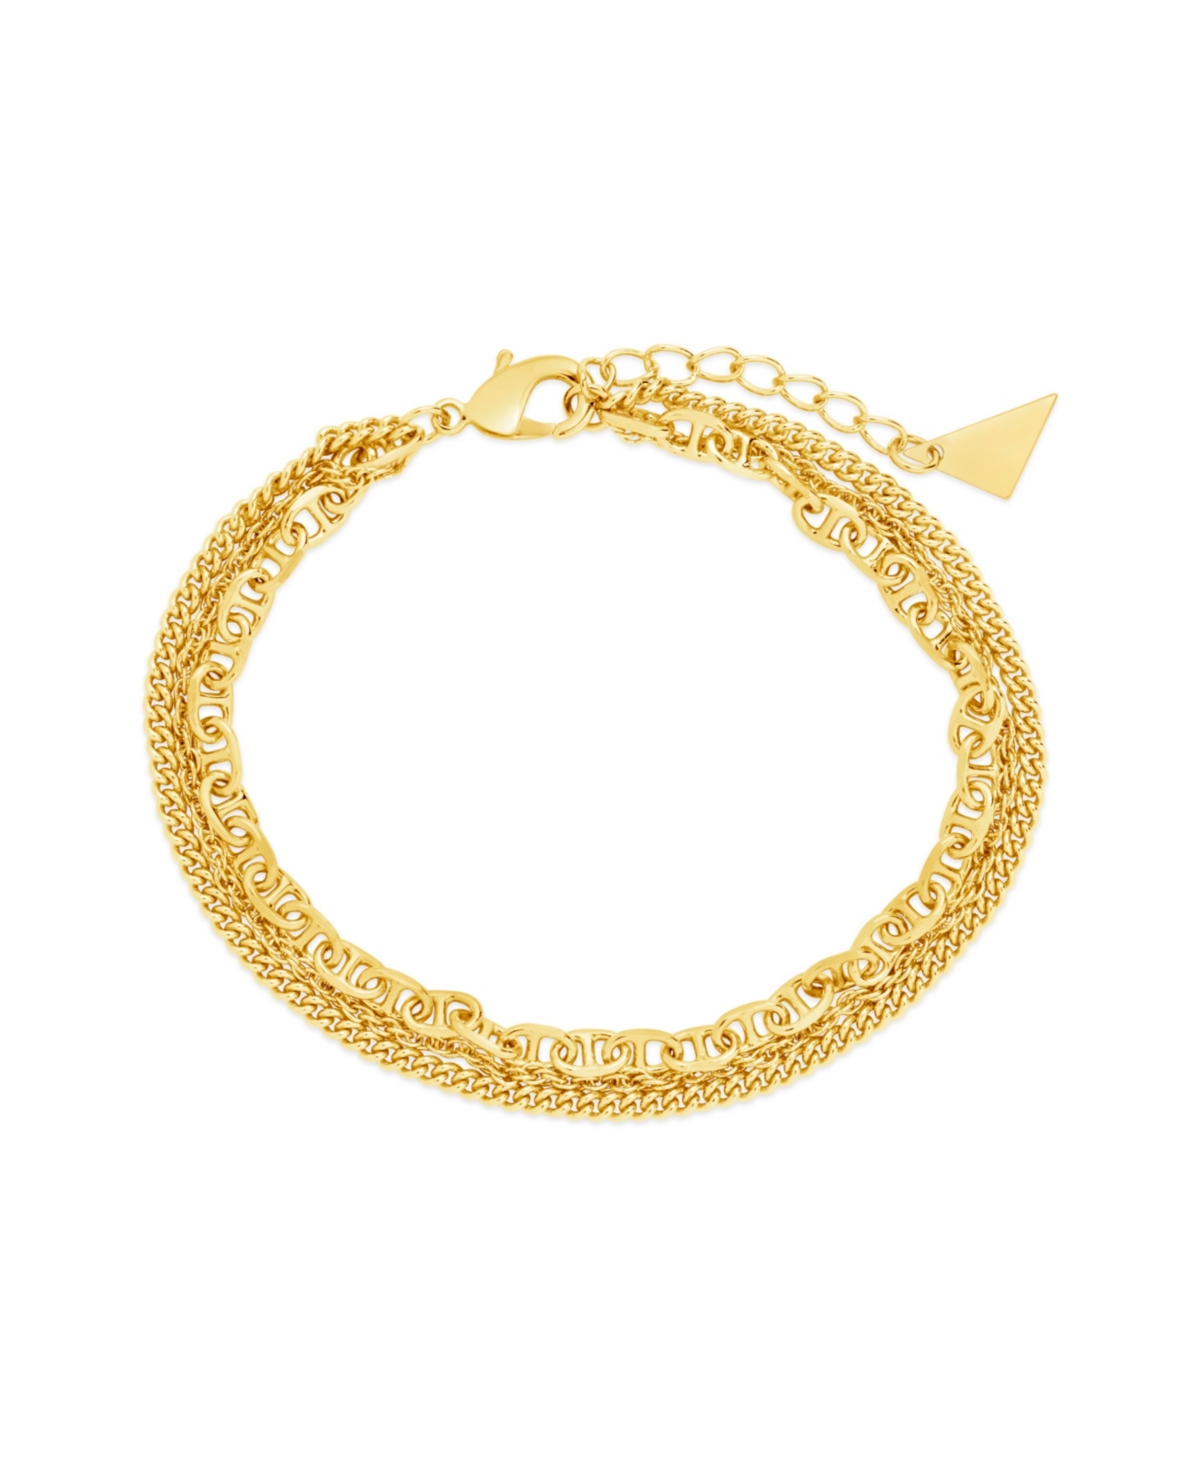 Shop Sterling Forever 14k Gold Plated Or Rhodium Plated Triple Chain Nevaeh Bracelet